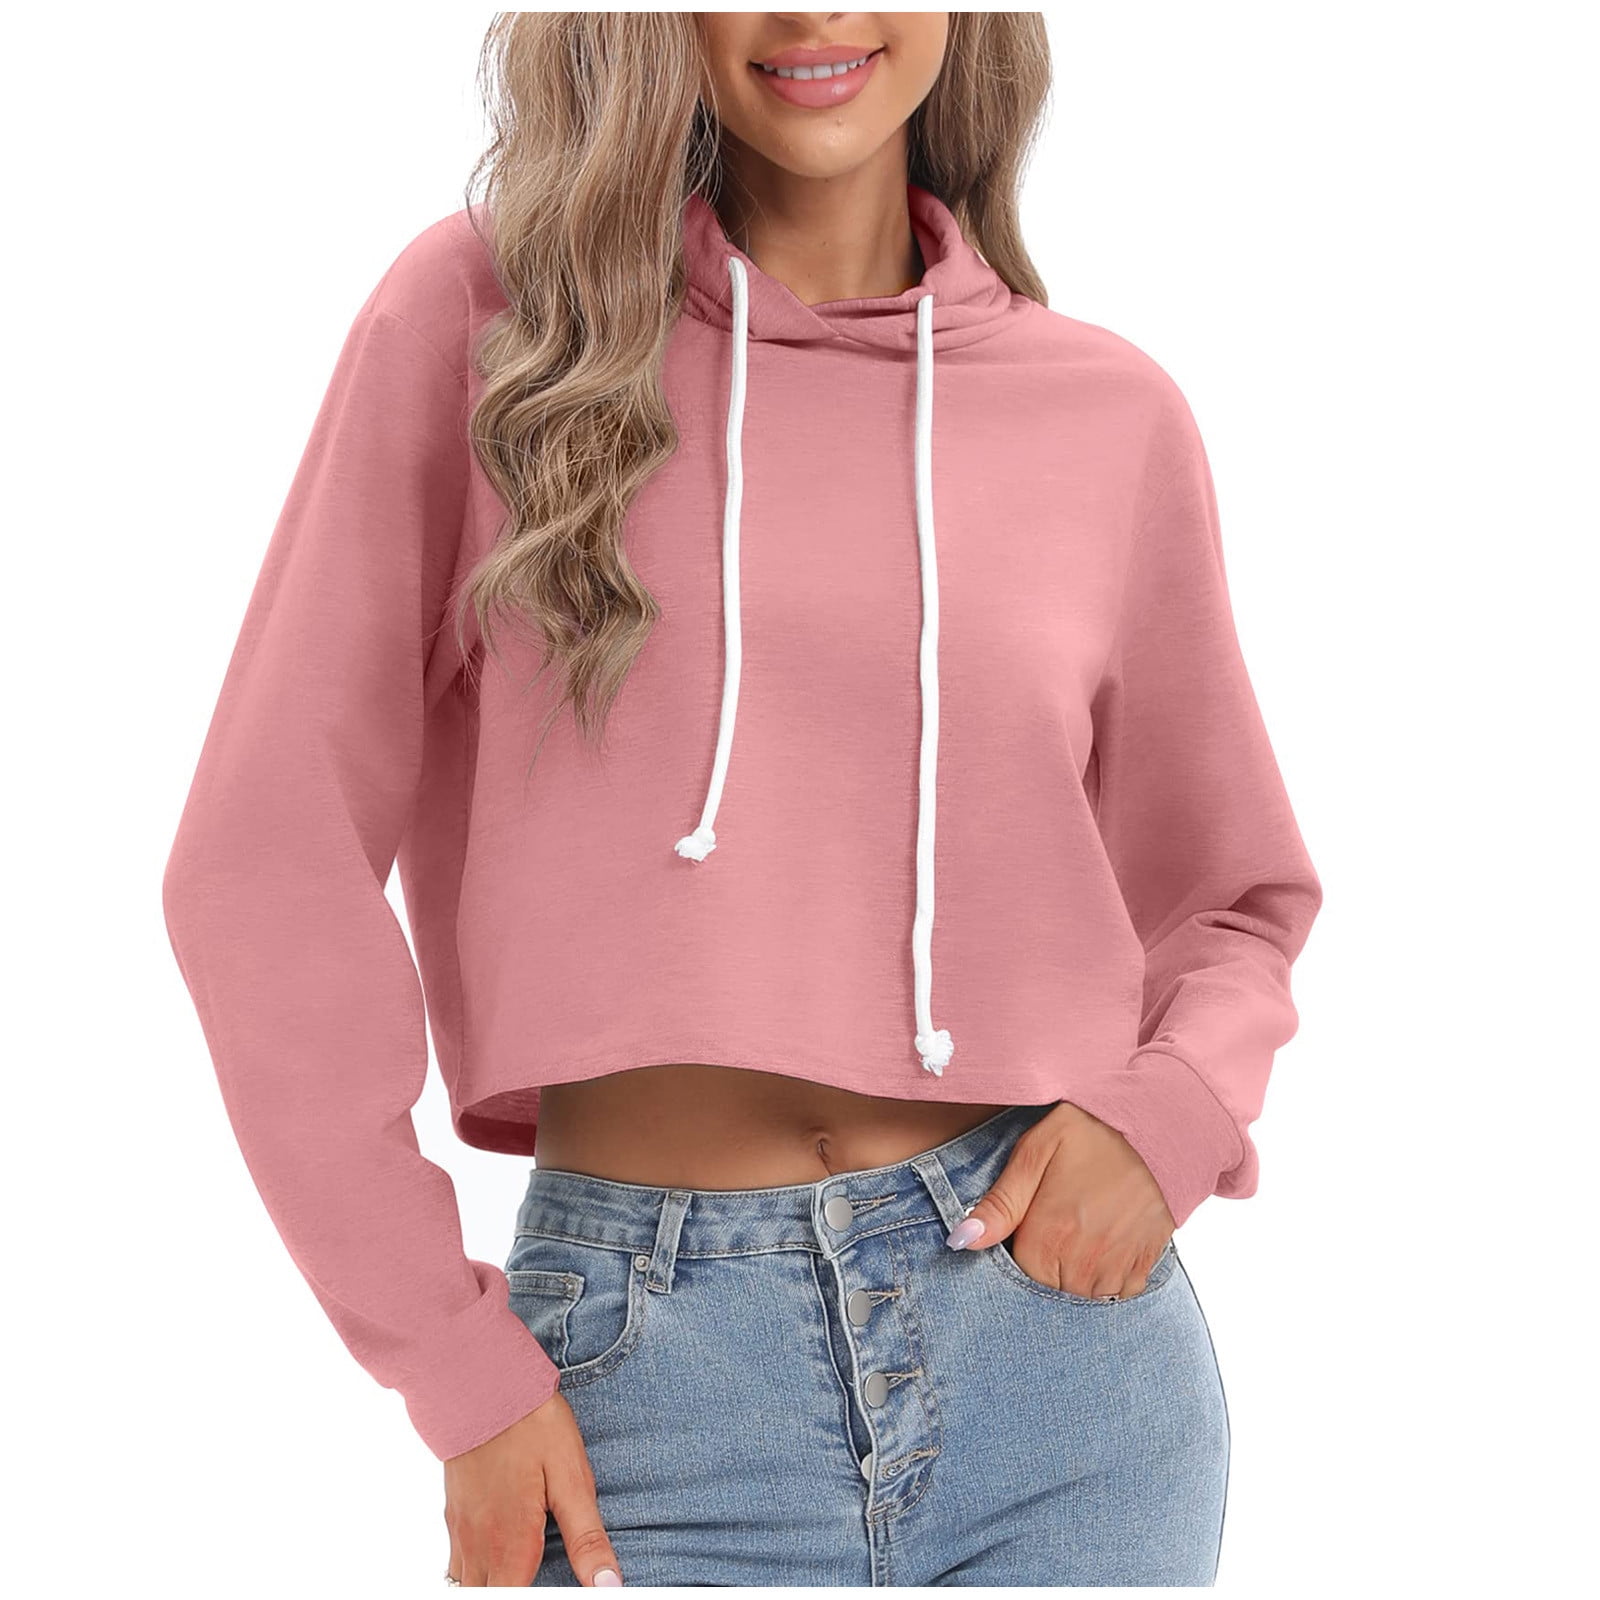 ZQGJB Long Sleeve Cropped Sweatshirts for Women Fall Spring Casual